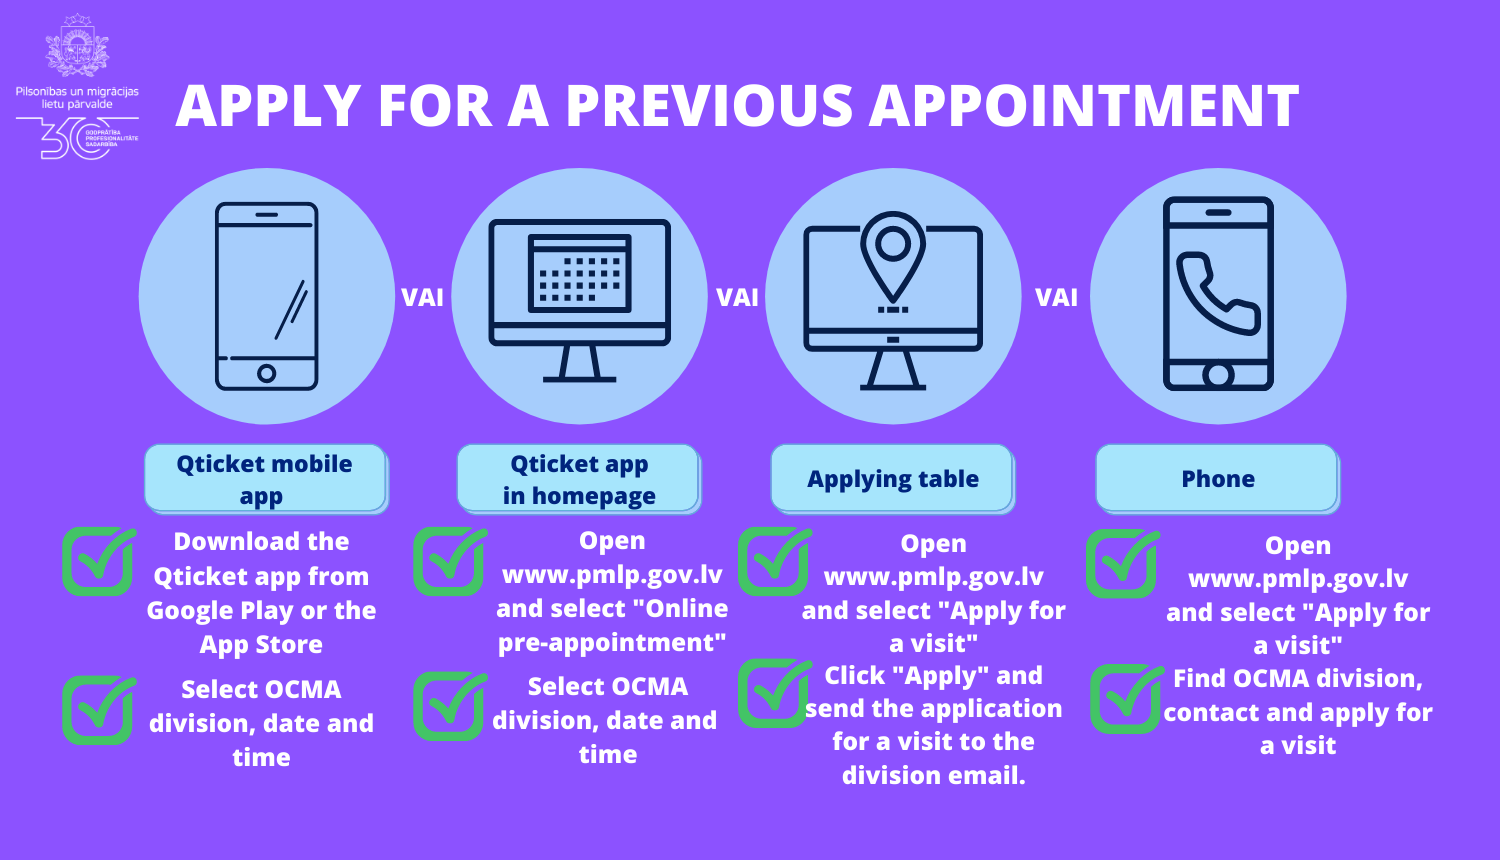 APPLY FOR A PREVIOUS APPOINTMENT